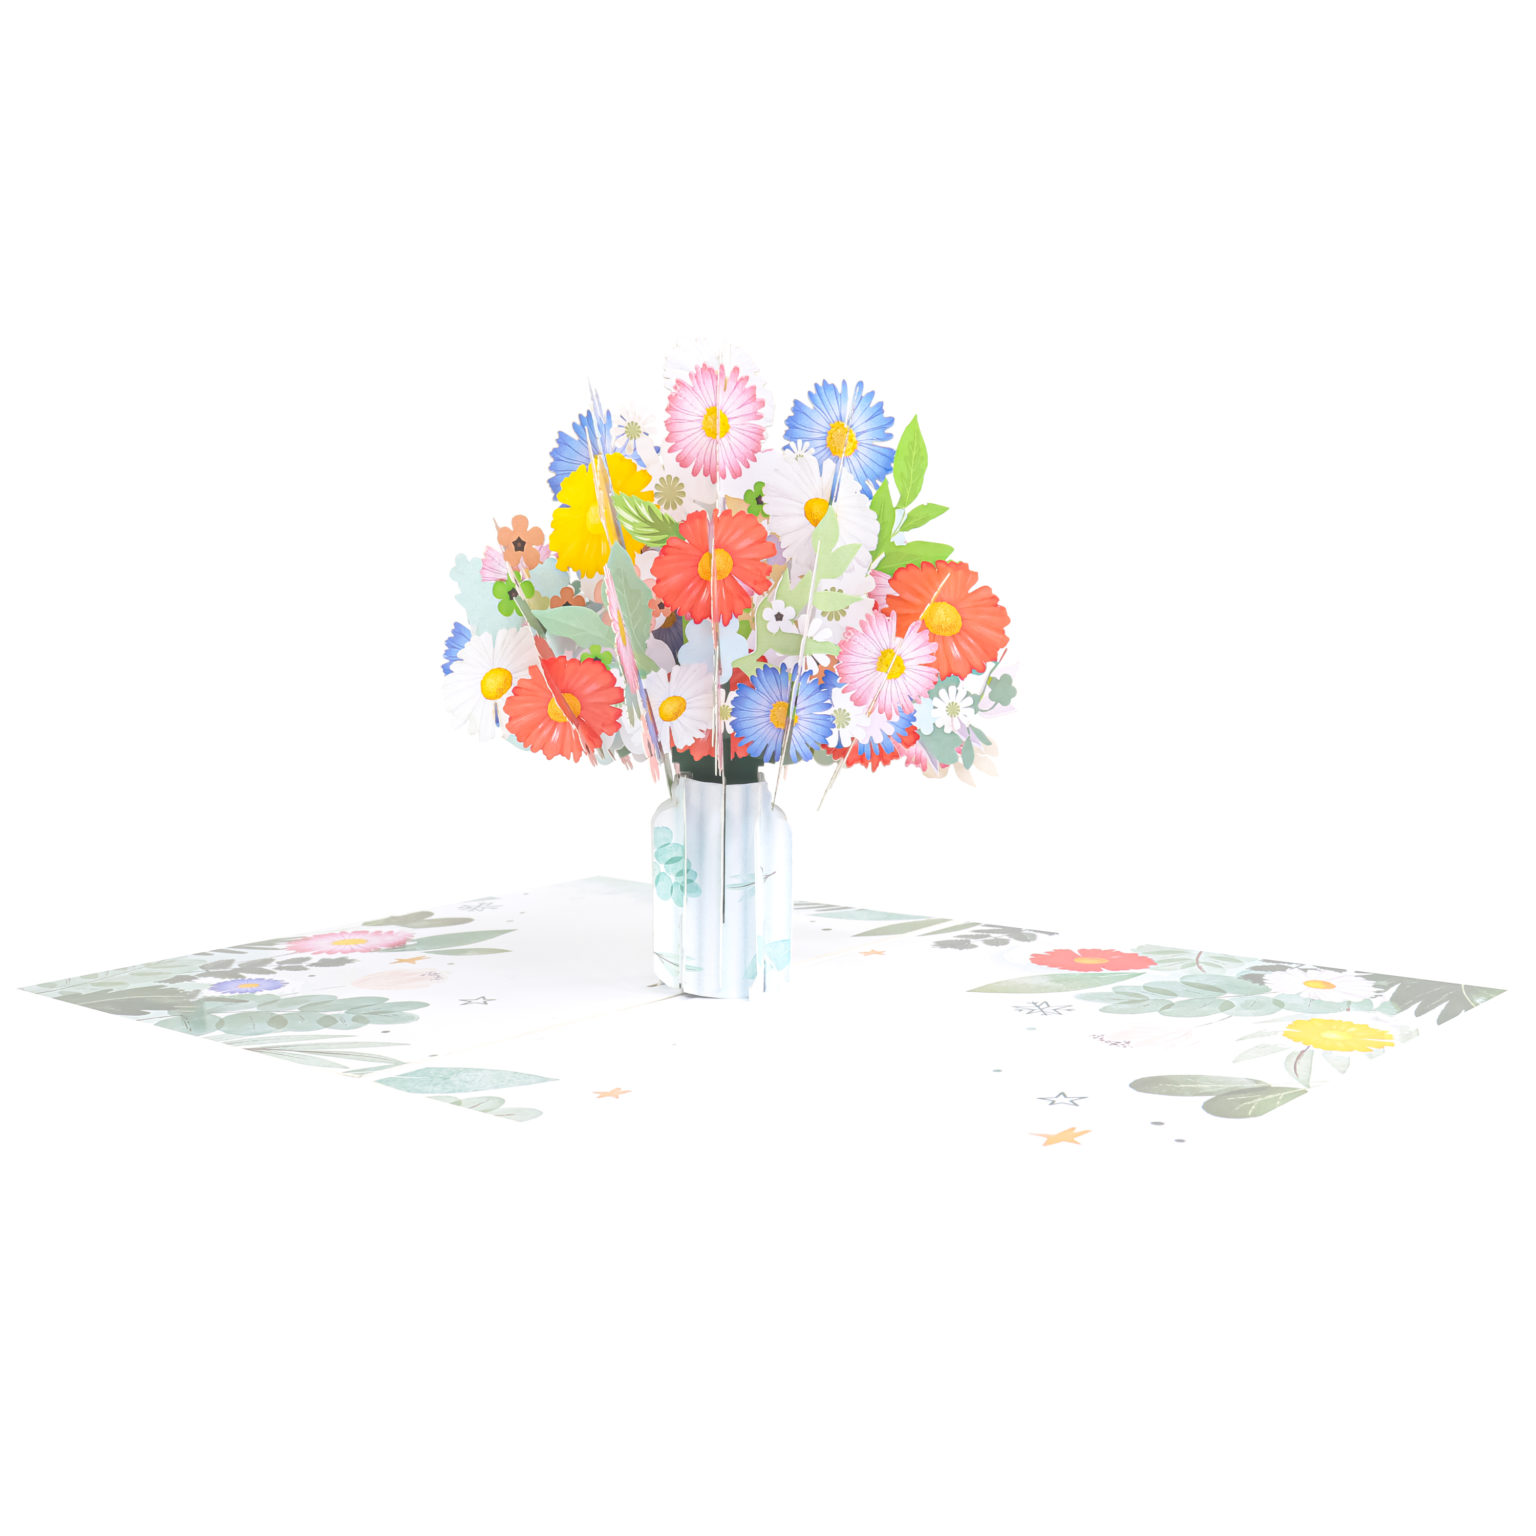 Daisy-Bouquet-Pop-Up-Card-FL086-overview-pop-up-card-wholesale-manufacturer-mothers-day-pop-up-card-flower-pop-up-card-birthday-3d-pop-up-greeting-card-laser-cut-1-scaled.jpg